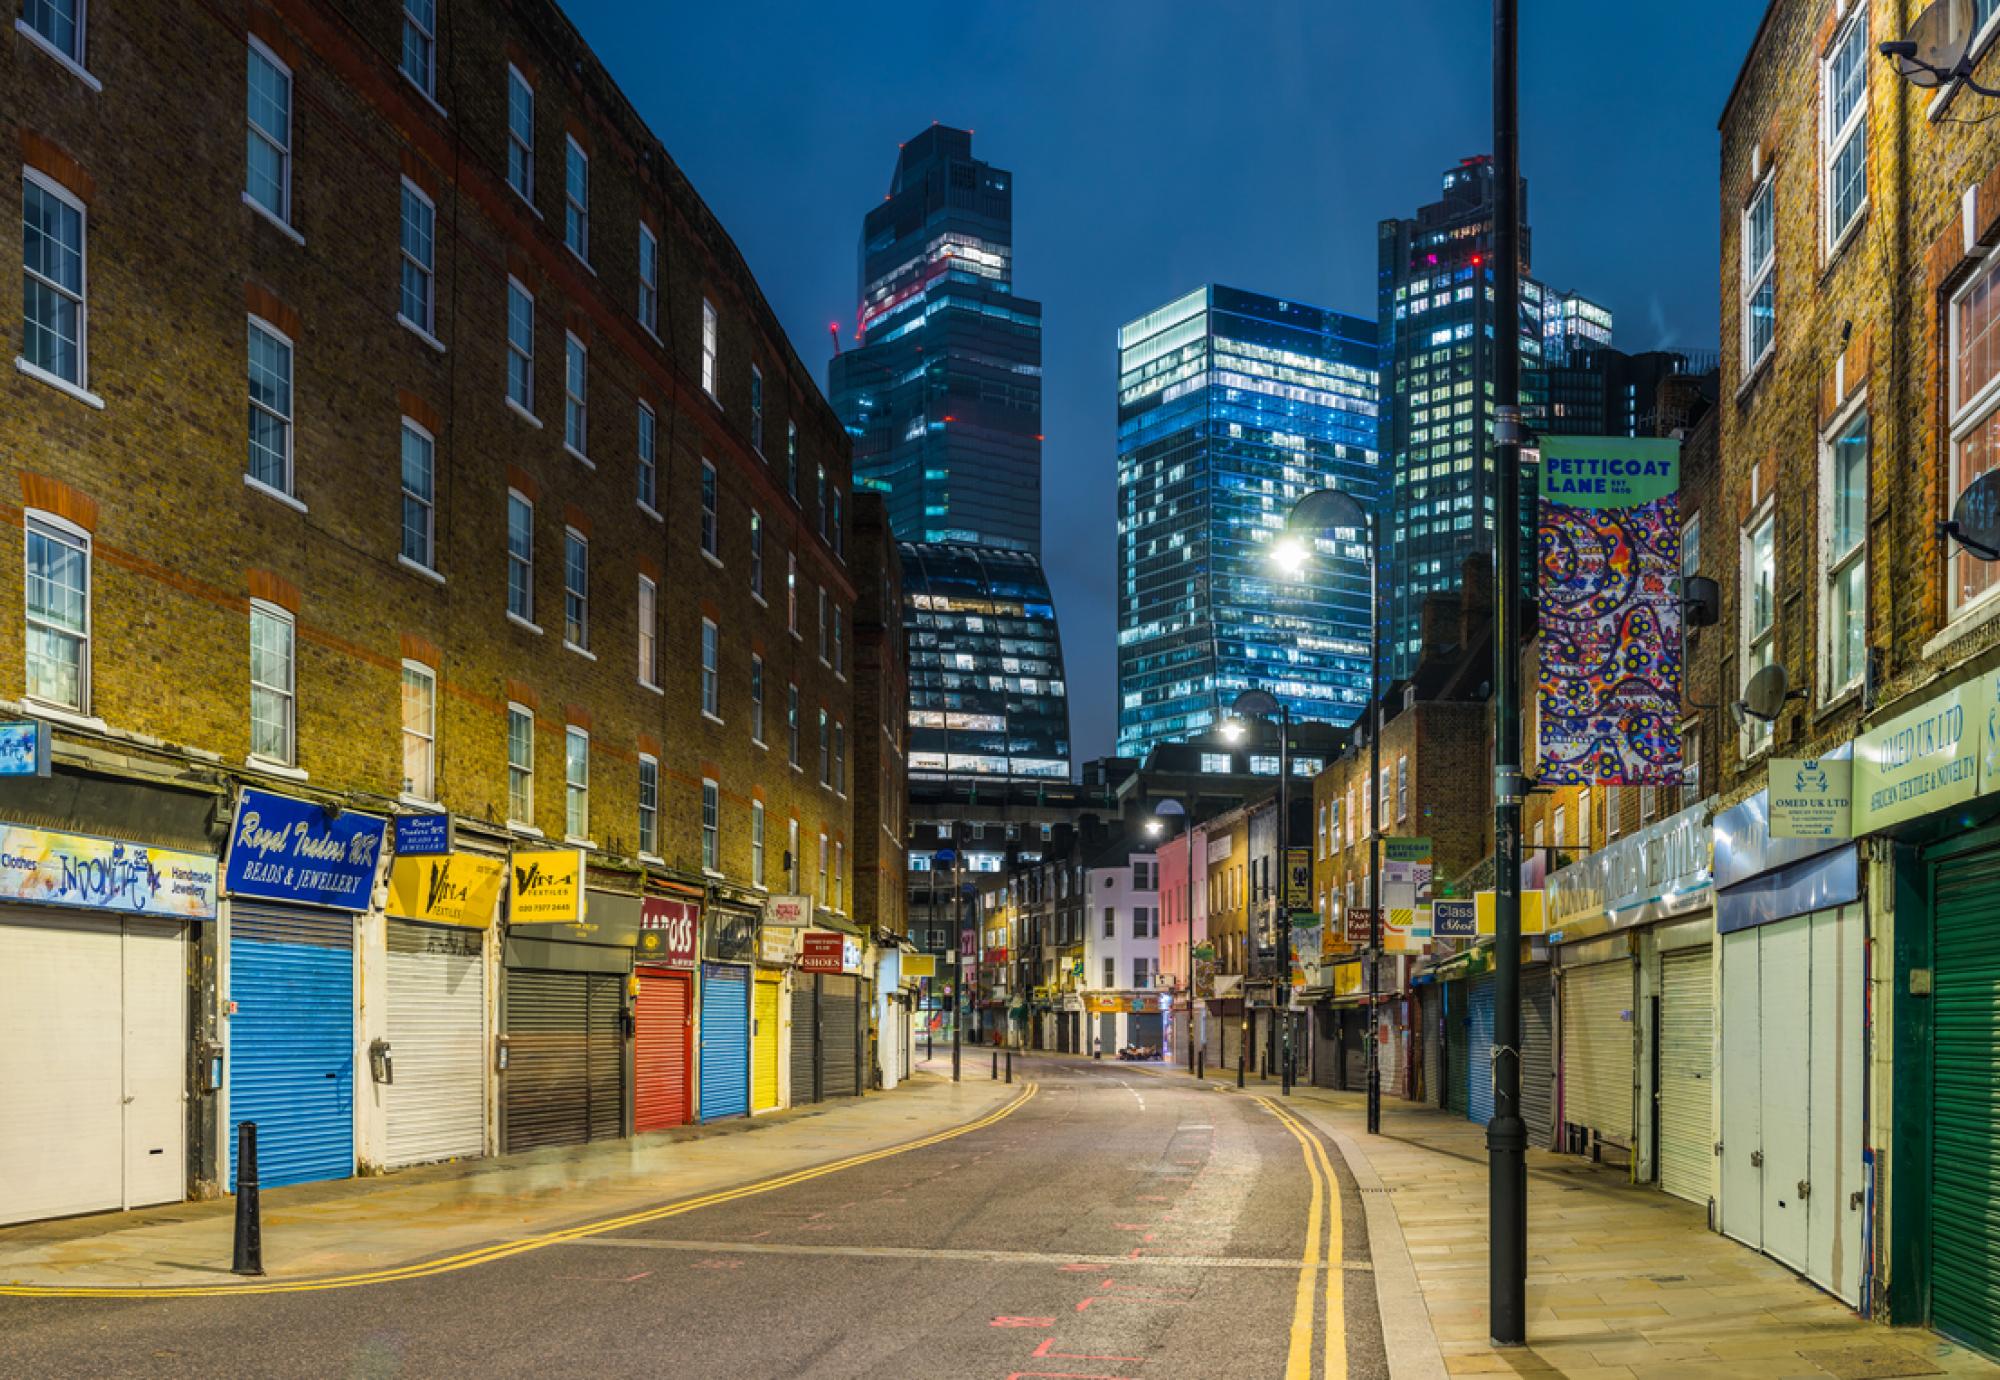 The futuristic towers of the City financial district illuminated at night overlooking the quiet streets and shops of Petticoat Lane Market in Spitafields, London